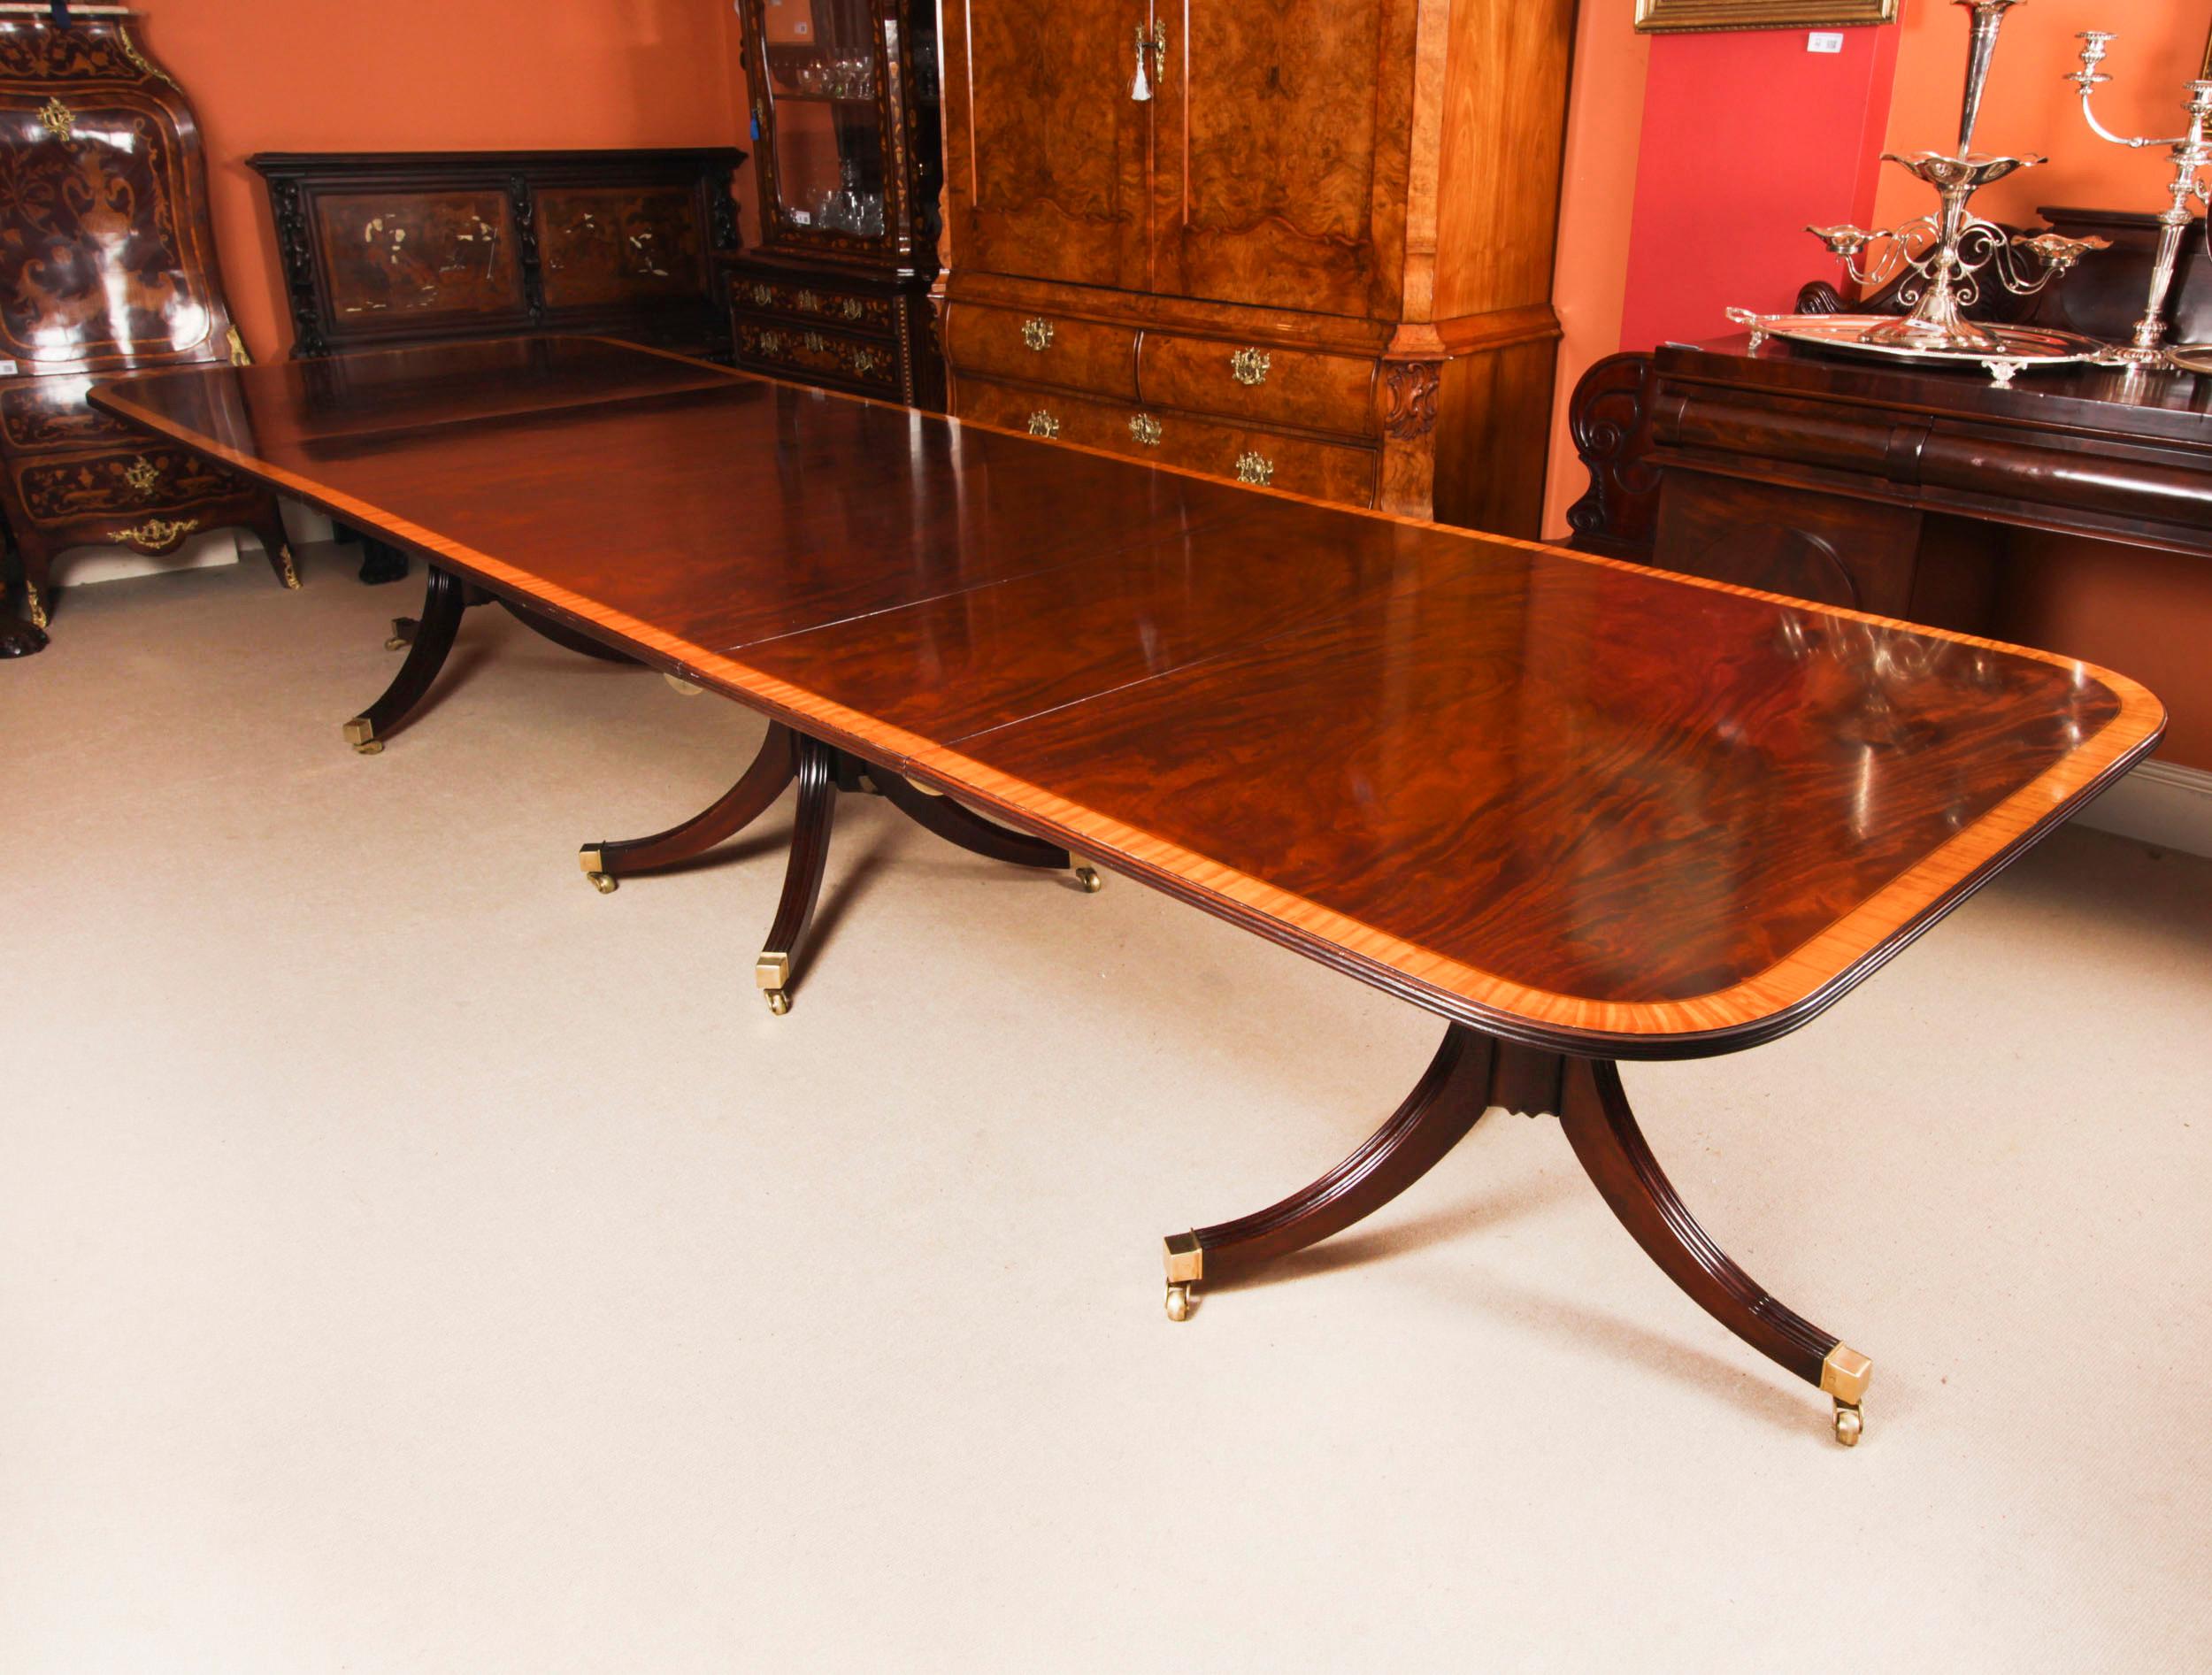 Regency Revival Vintage 13ft Three Pillar Mahogany Dining Table with 14 Chairs 20th C For Sale